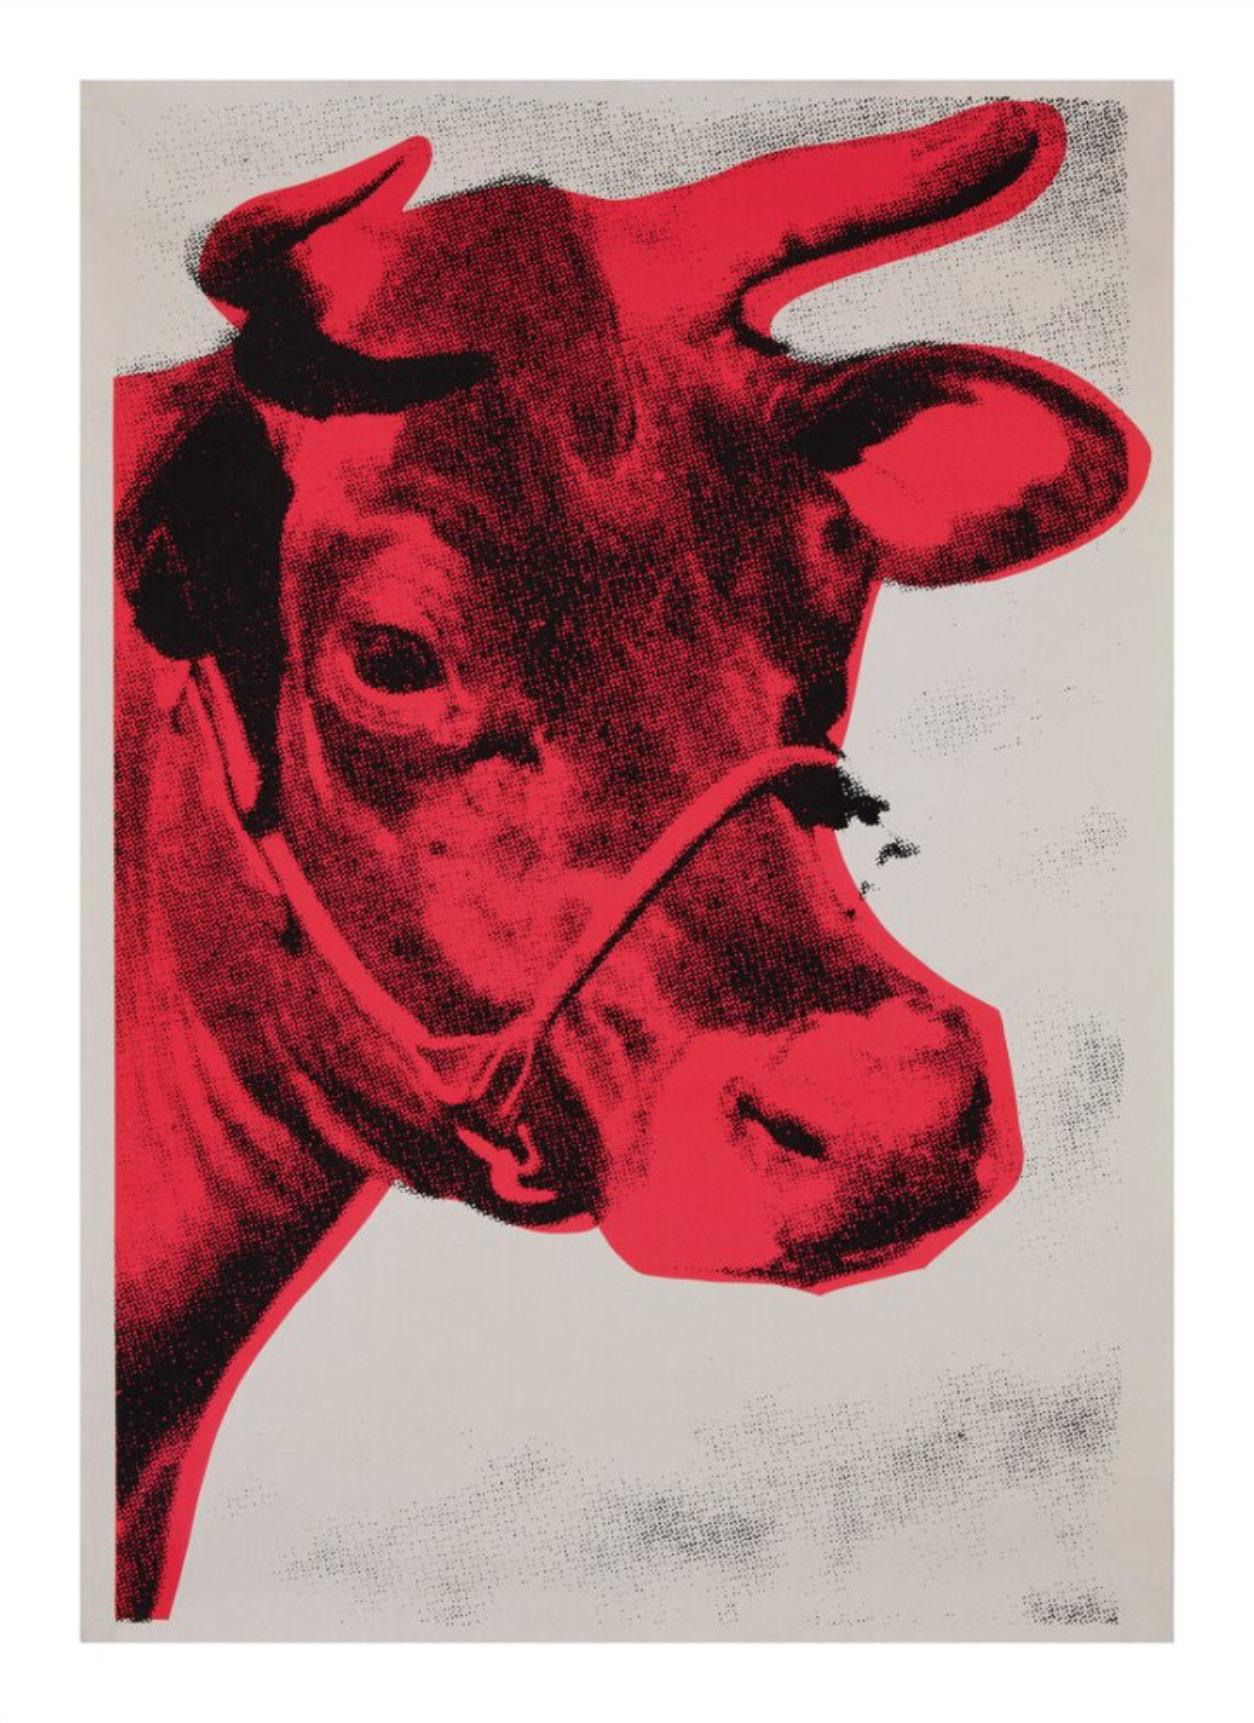 Andy Warhol, Cow, 1976 (Special Edition)

Textured heavy weight acid free archival watercolour paper with lightfast inks

Image size 60 x 90 cm (23.62 x 35.43 in)
Paper size 70 x 100 cm (27.56 x 39.37 in)

In a 1966 exhibition at the Leo Castelli